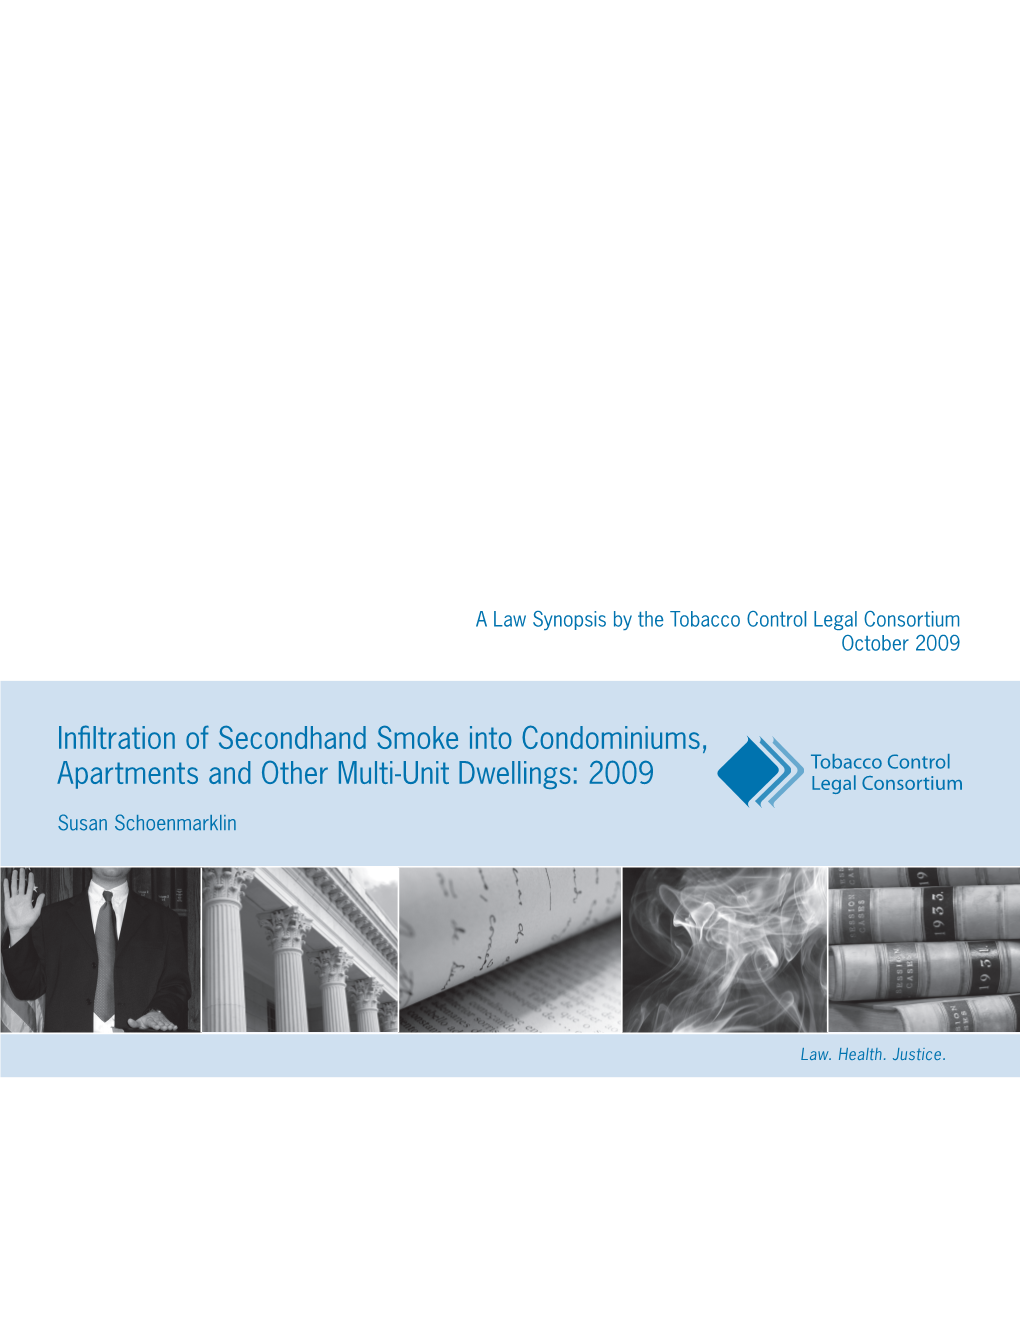 Infiltration of Secondhand Smoke Into Condominiums, Apartments and Other Multi-Unit Dwellings: 2009 (2009)